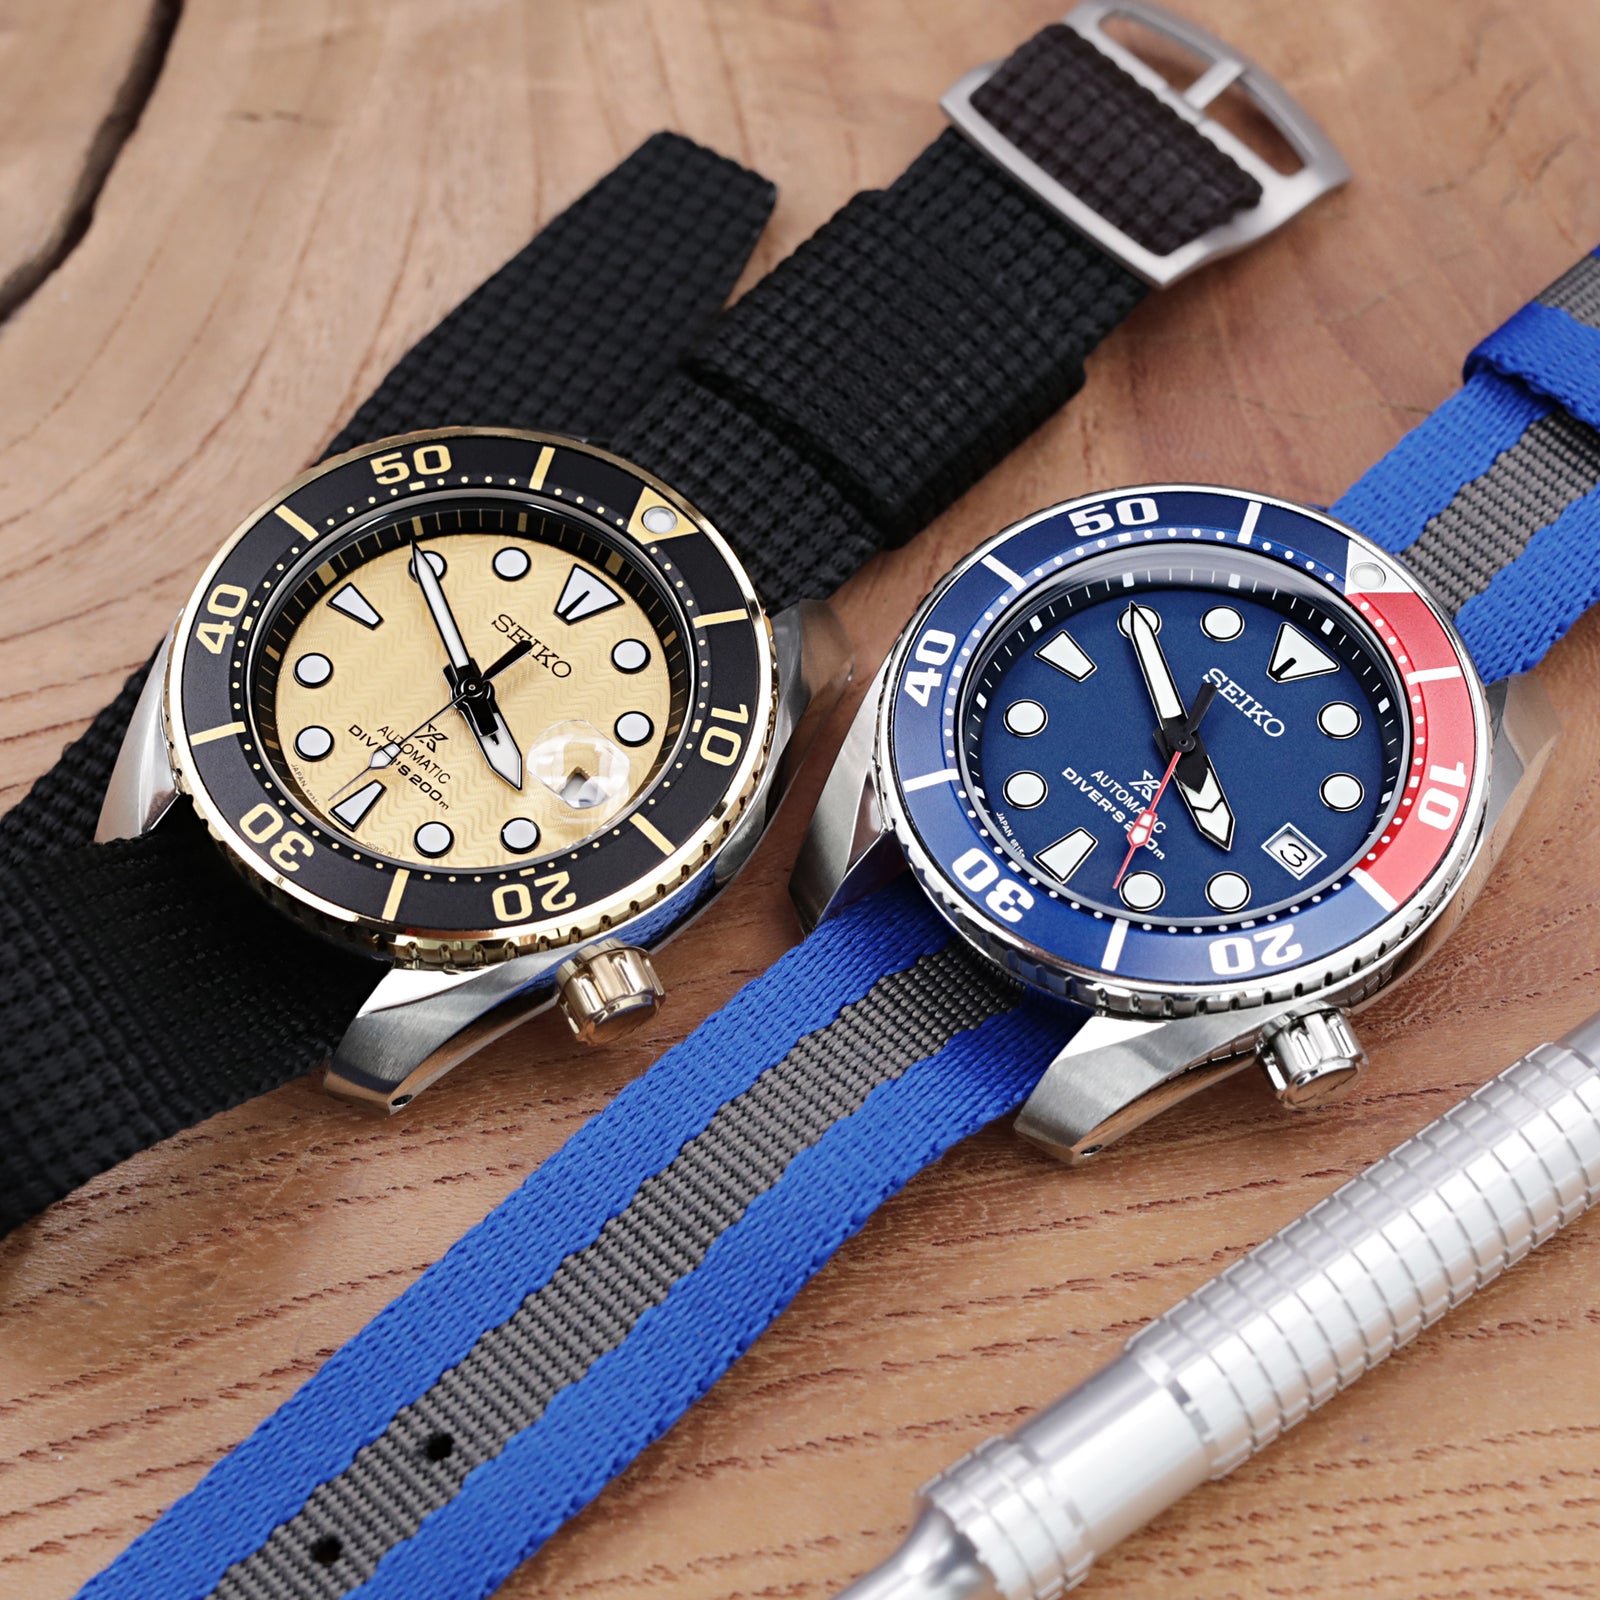 Nato Strap : The RAF N7 Collection - Strapcode